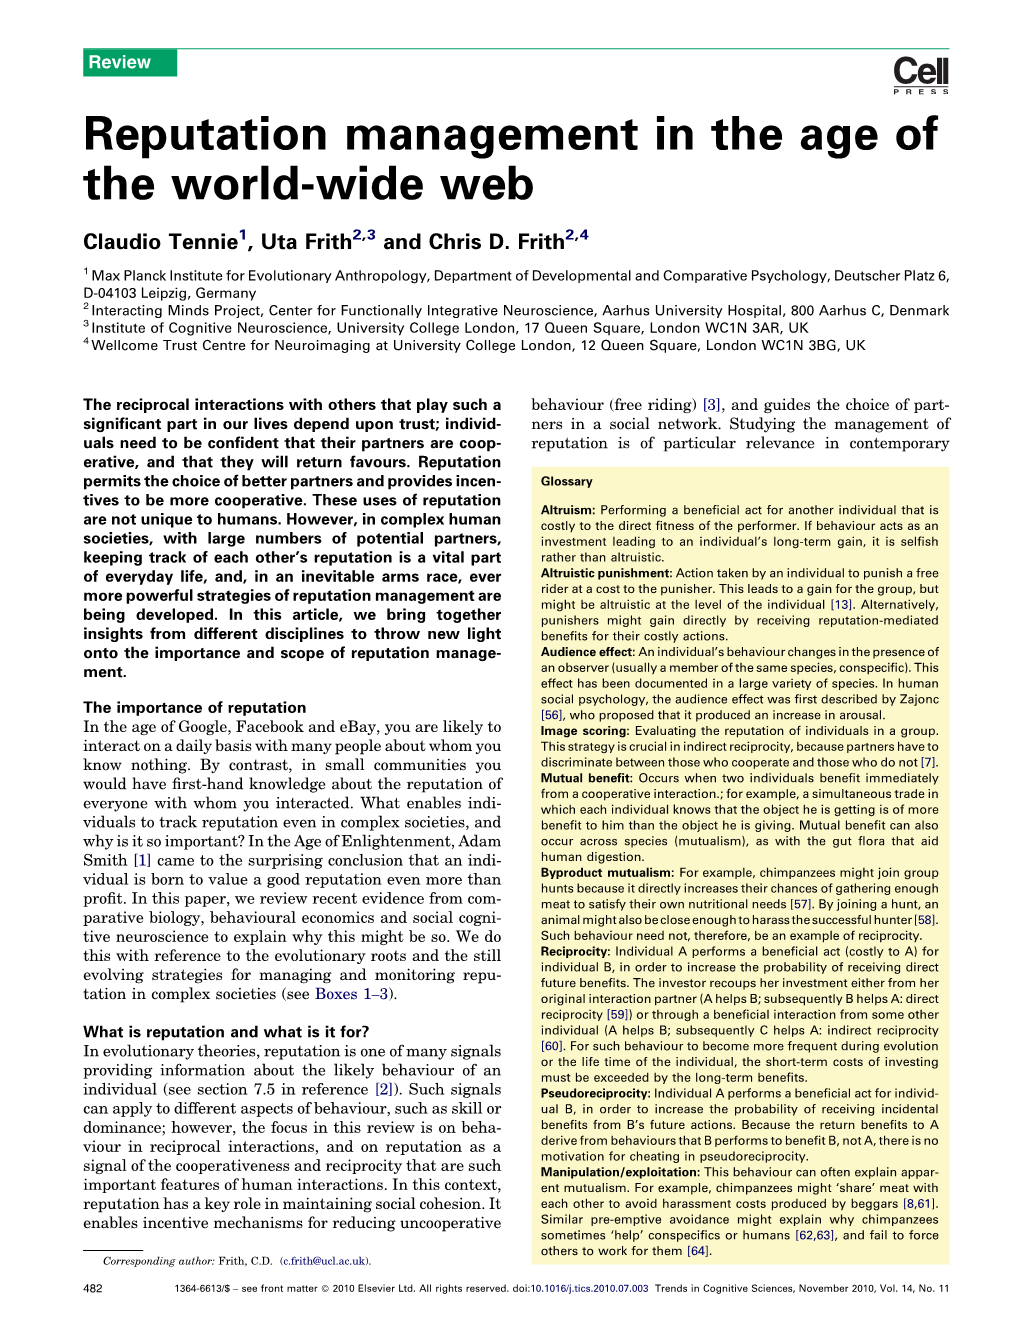 Reputation Management in the Age of the World-Wide Web